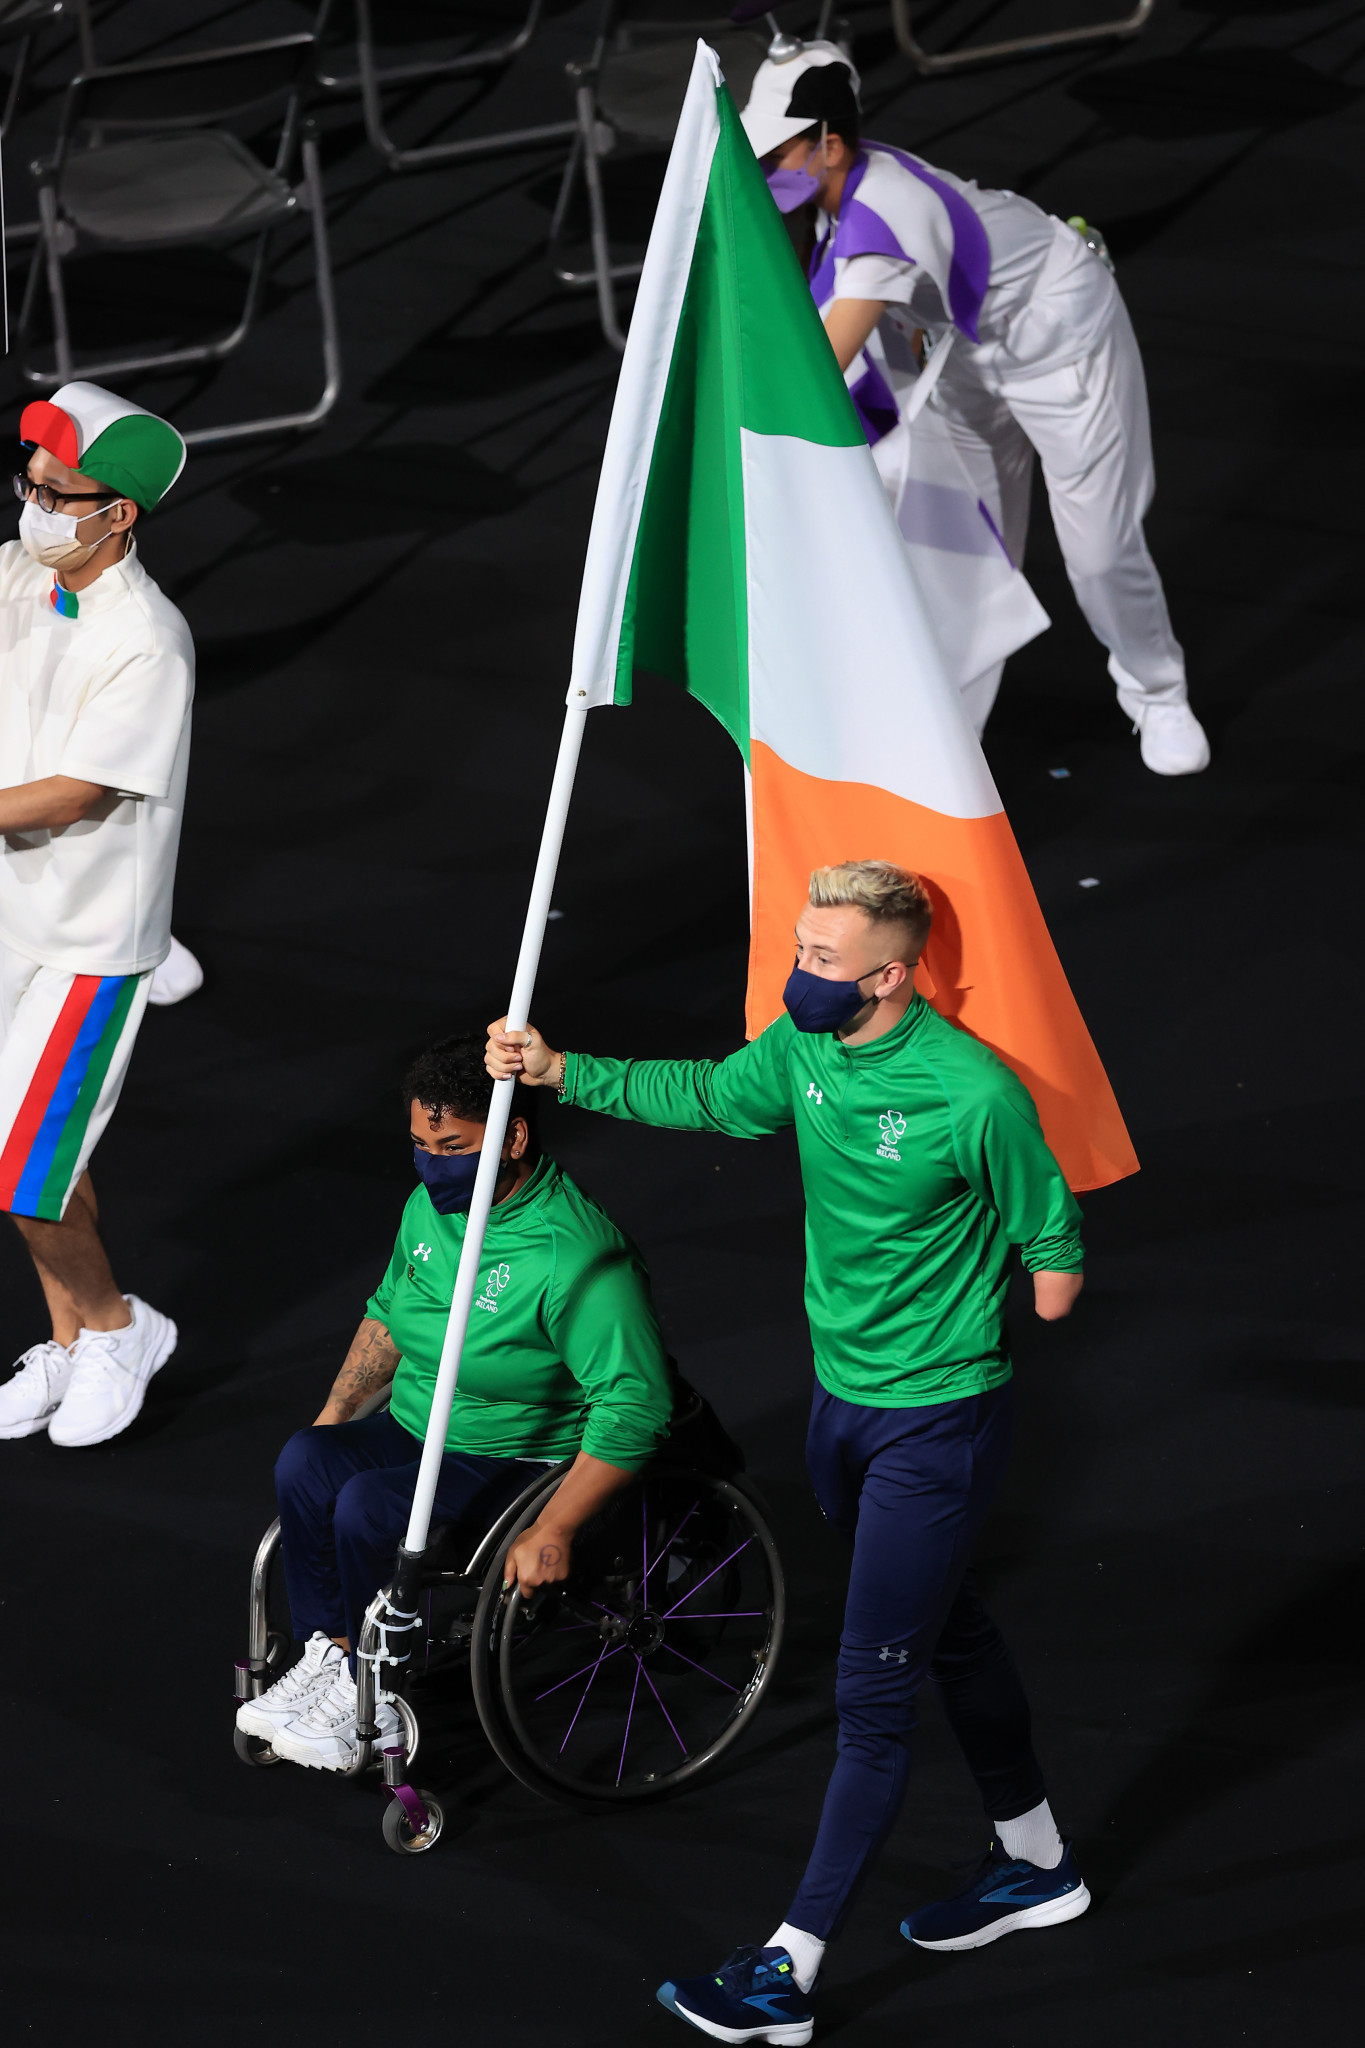 Ireland's Paralympic team will be offered enhanced sports science support from the Sport Ireland Institute as they prepare for Paris 2024 ©Getty Images